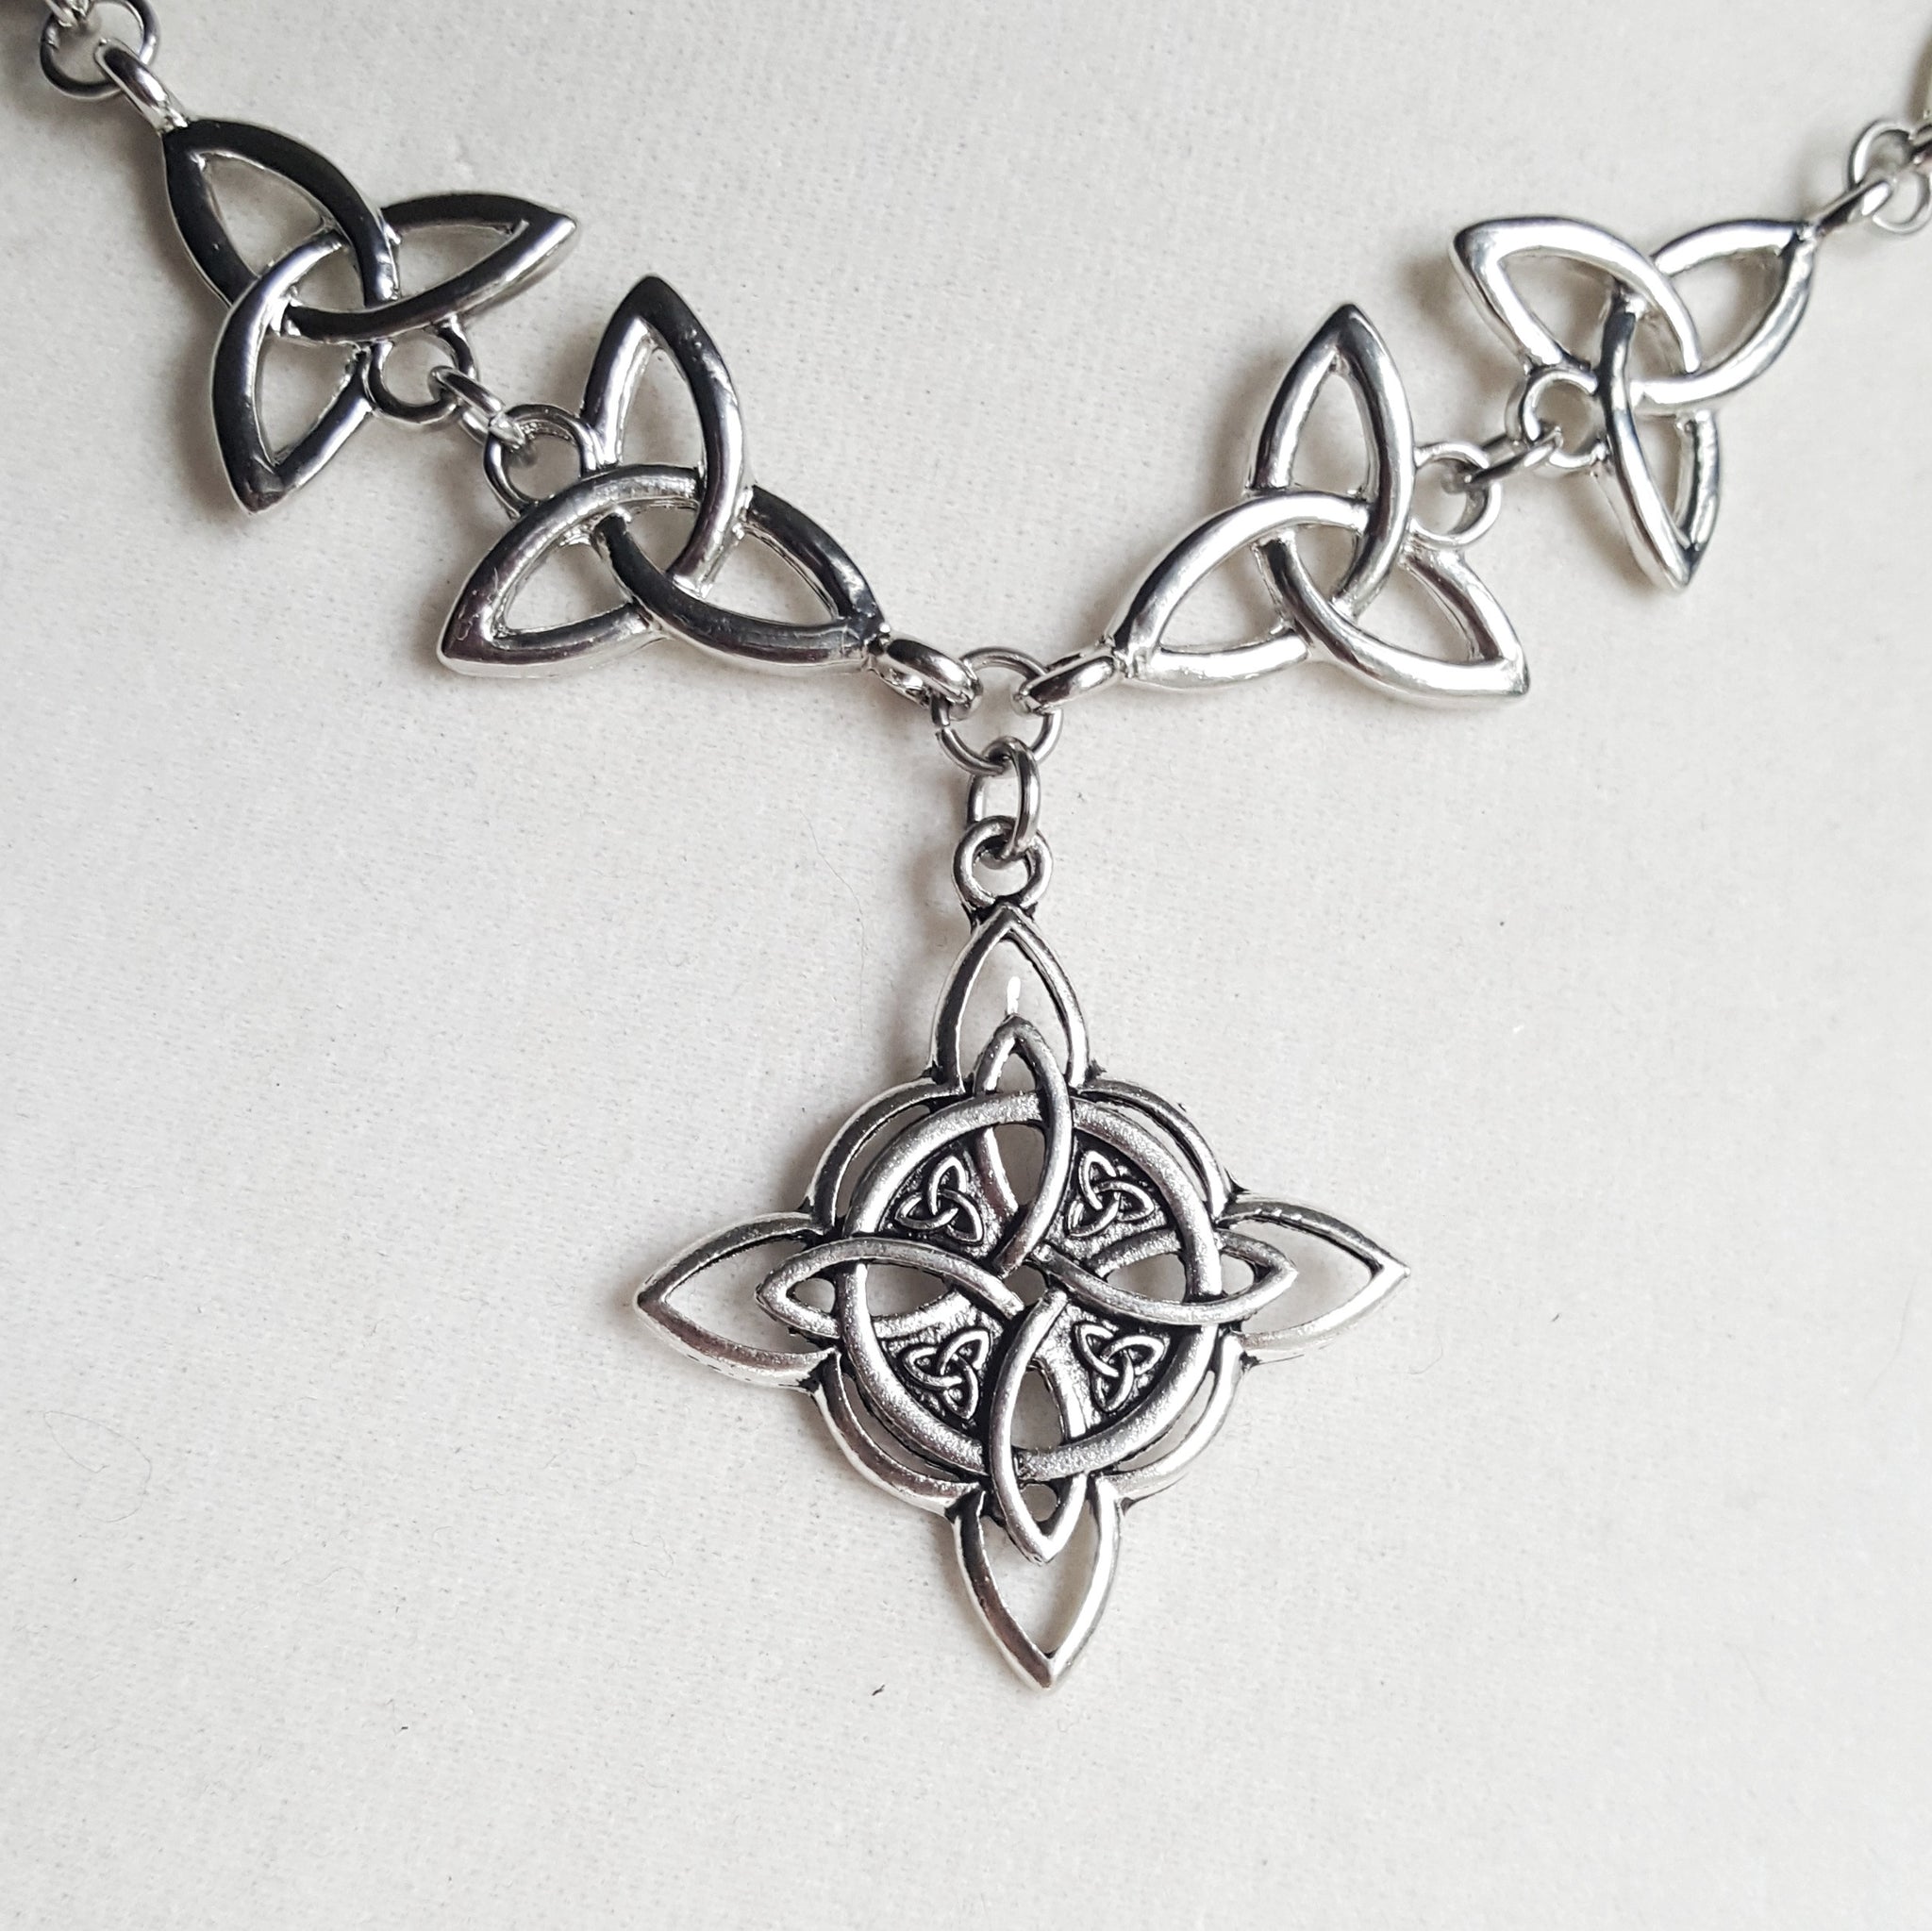 Silver Celtic Knot Necklace Triqueta Wiccan Jewelry - DRAVYNMOOR